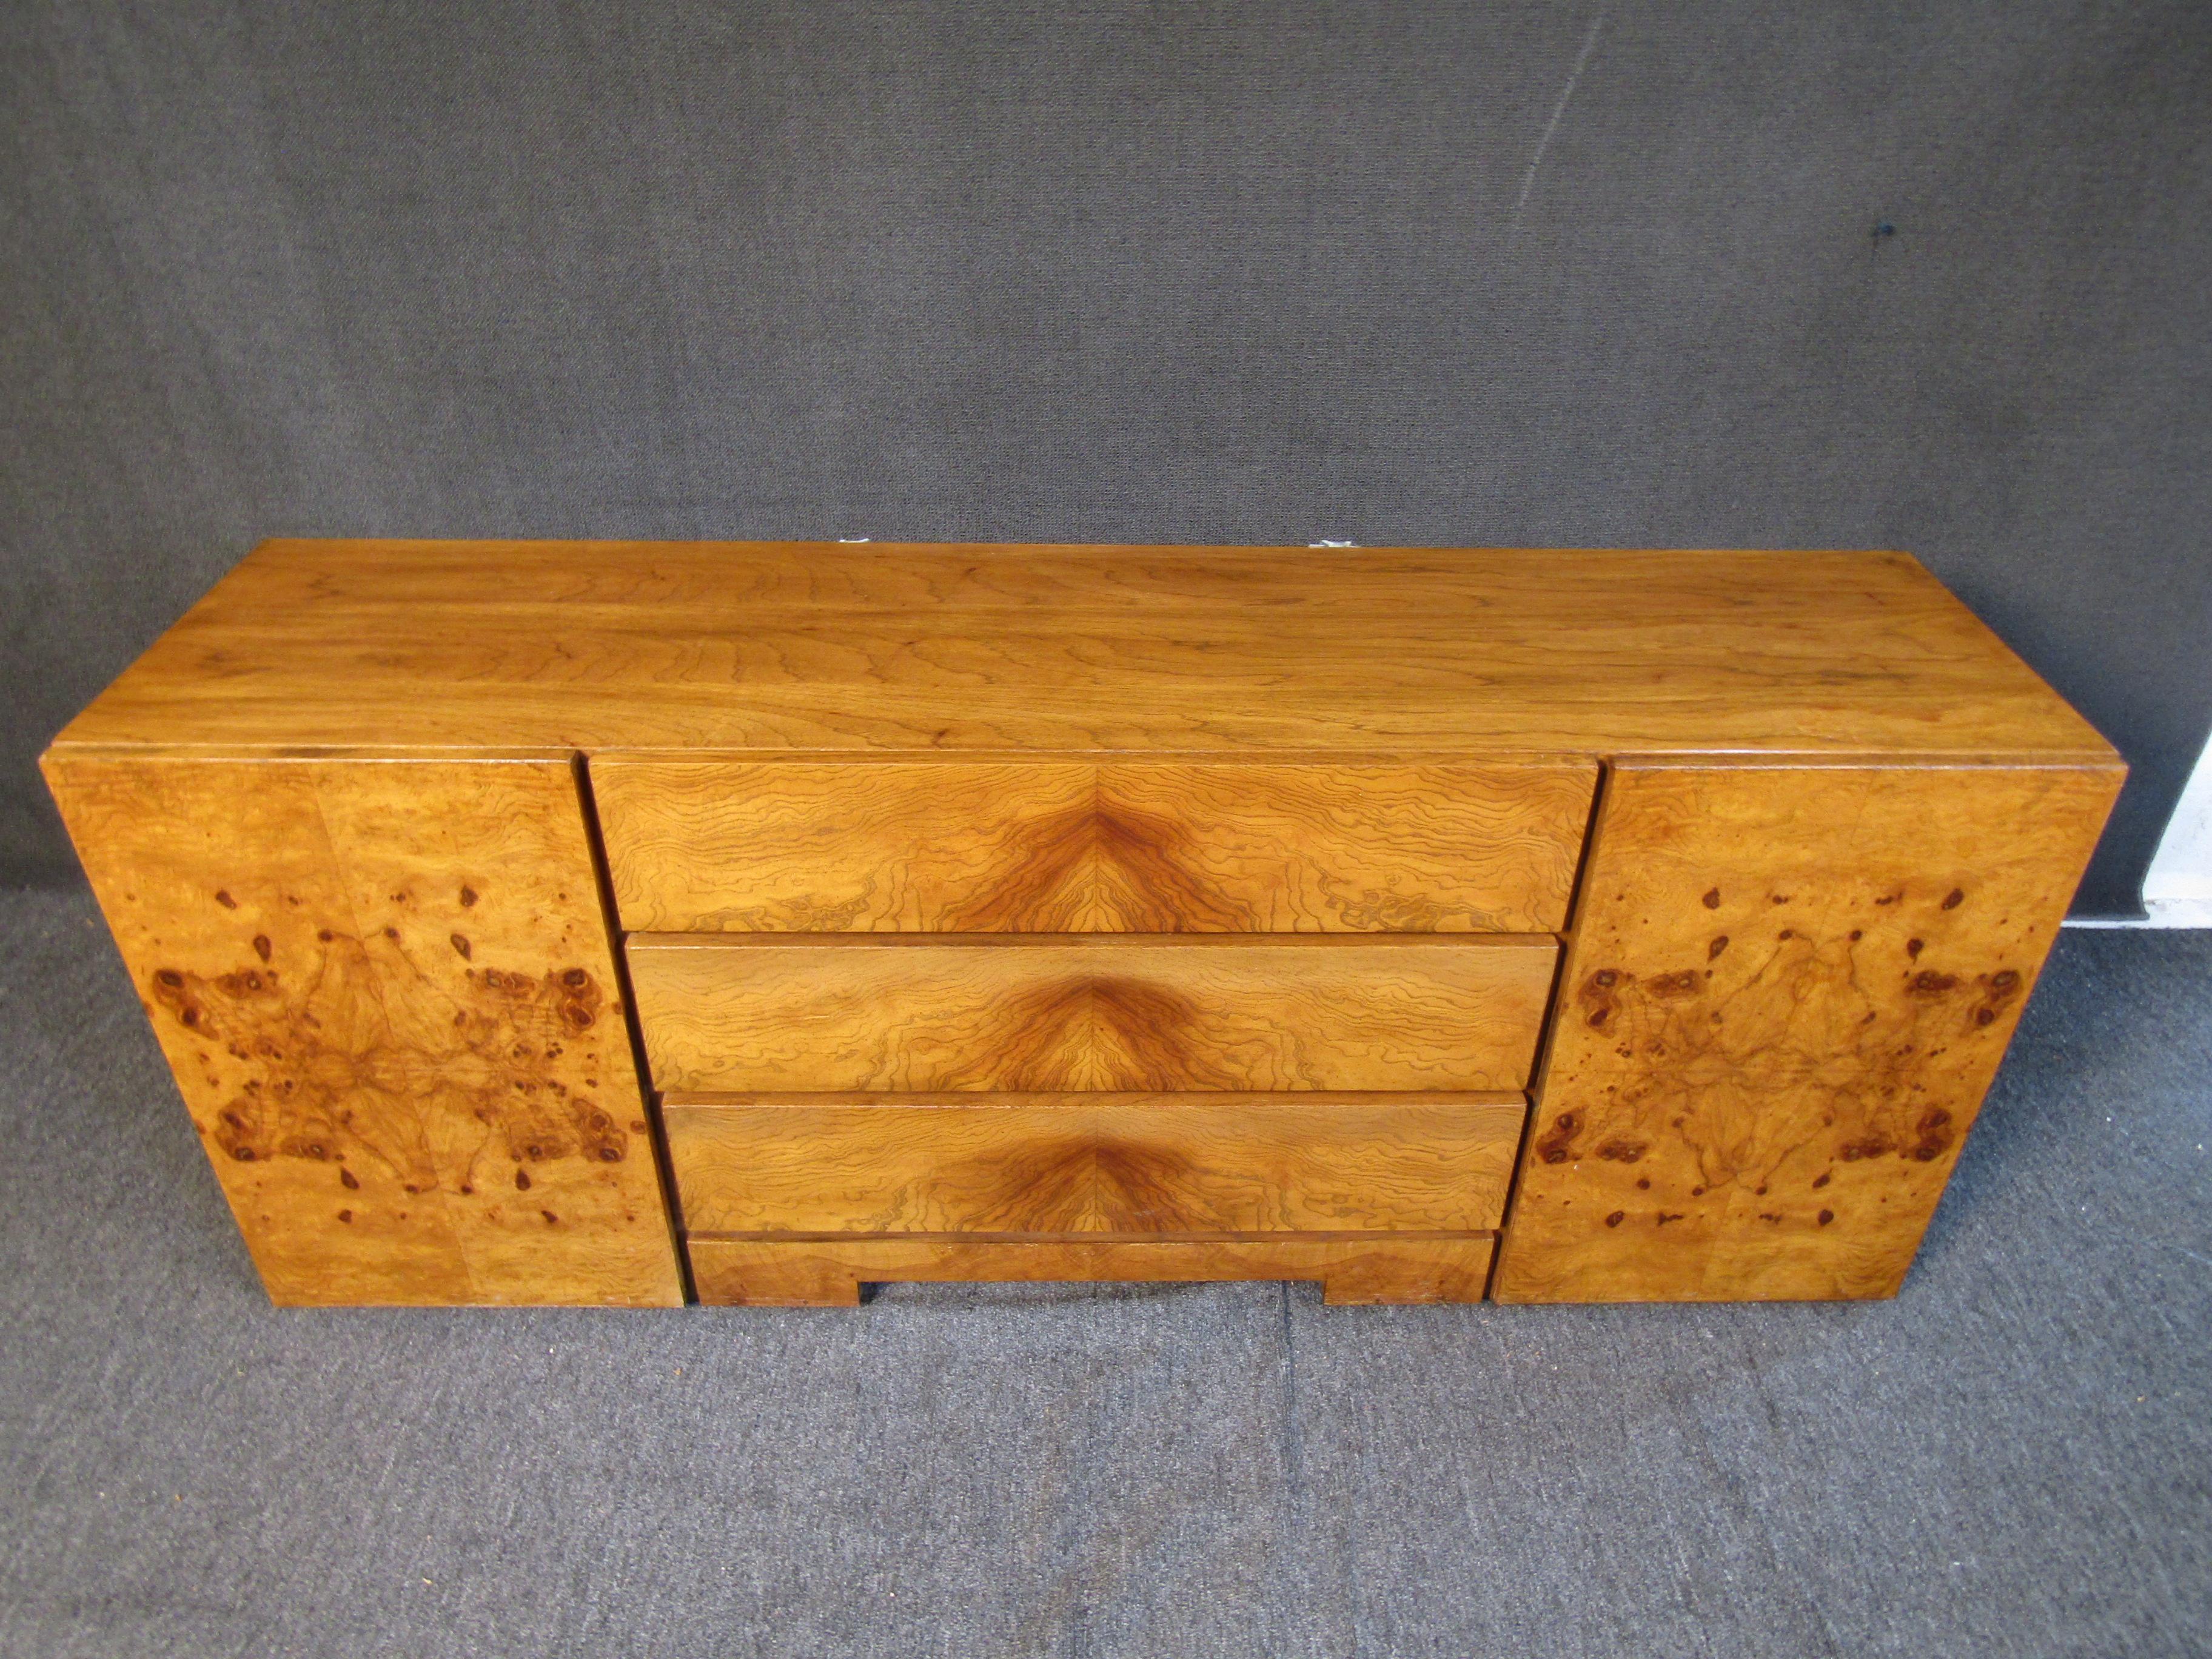 This vintage credenza designed in the style of Milo Baughman shows off a beautiful burl wood finish with nine separate drawers for ample storage. Please confirm item location with seller (NY/NJ).